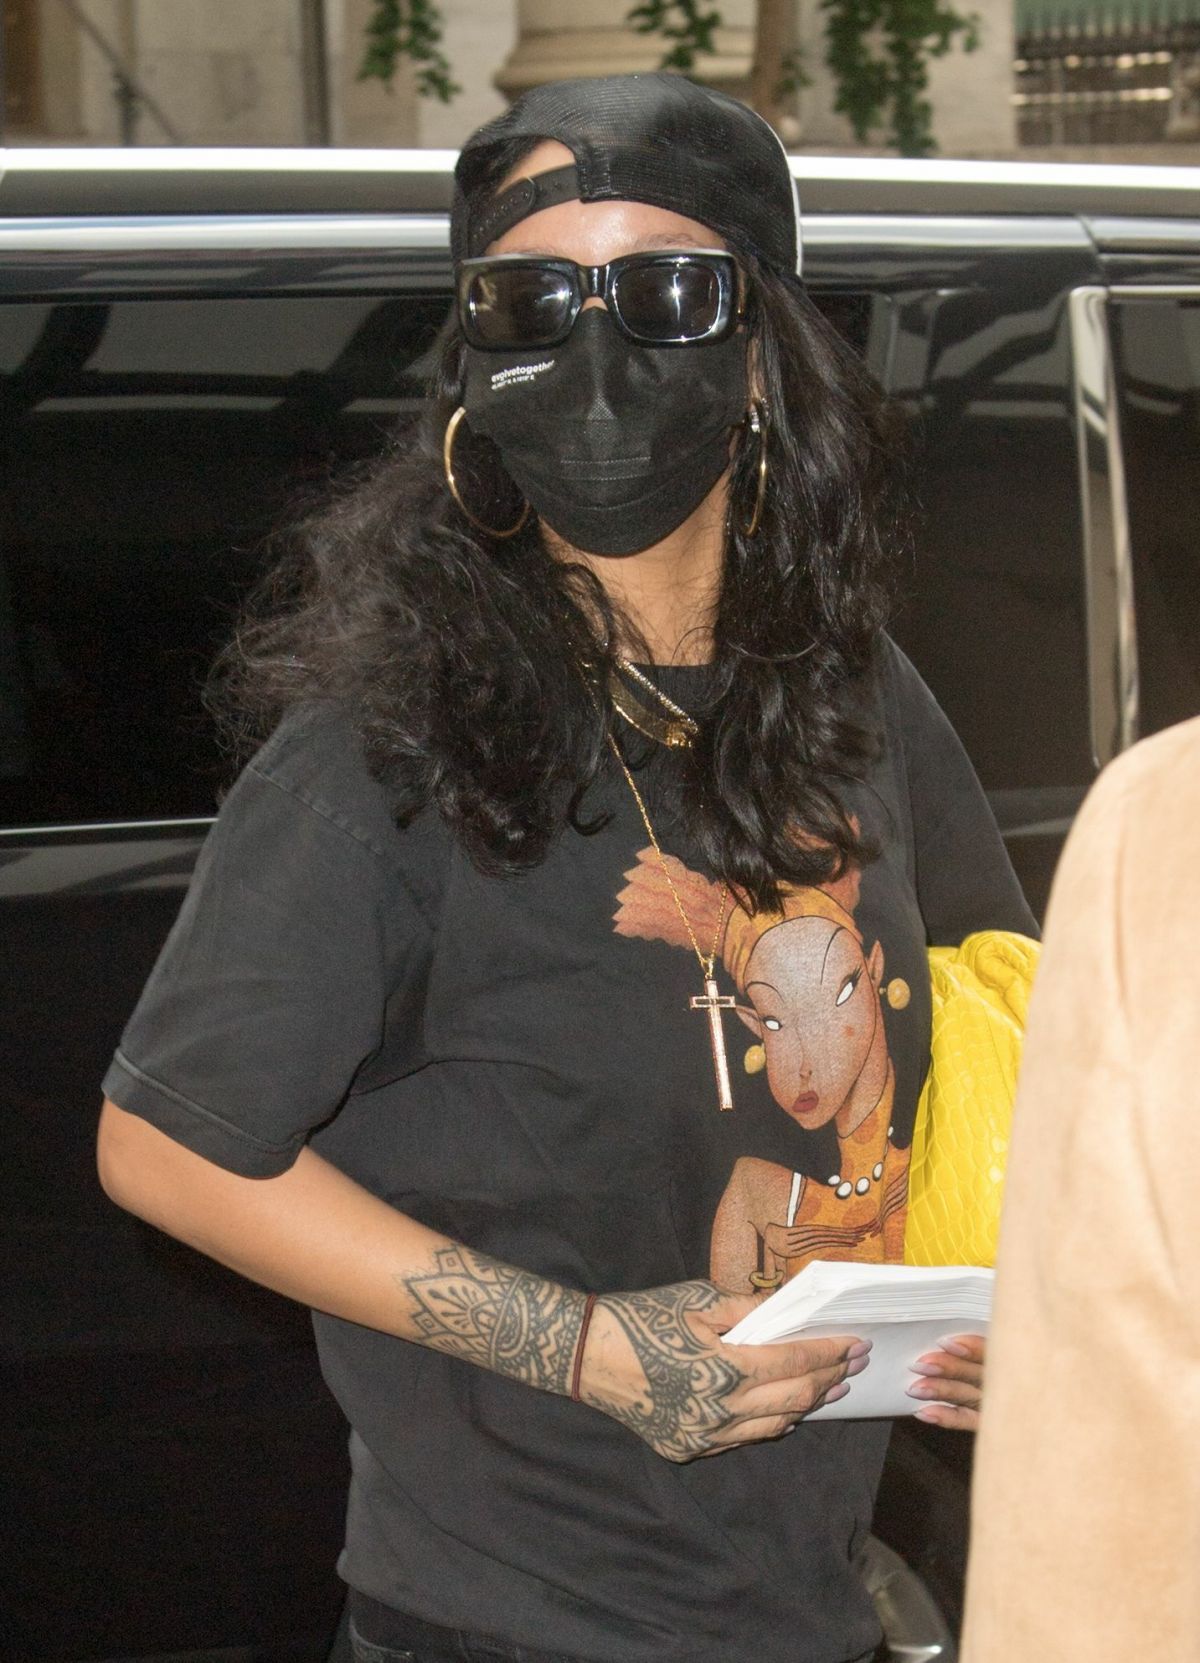 Rihanna Returns to Her Hotel After Day Out in NYC: Photo 4924557